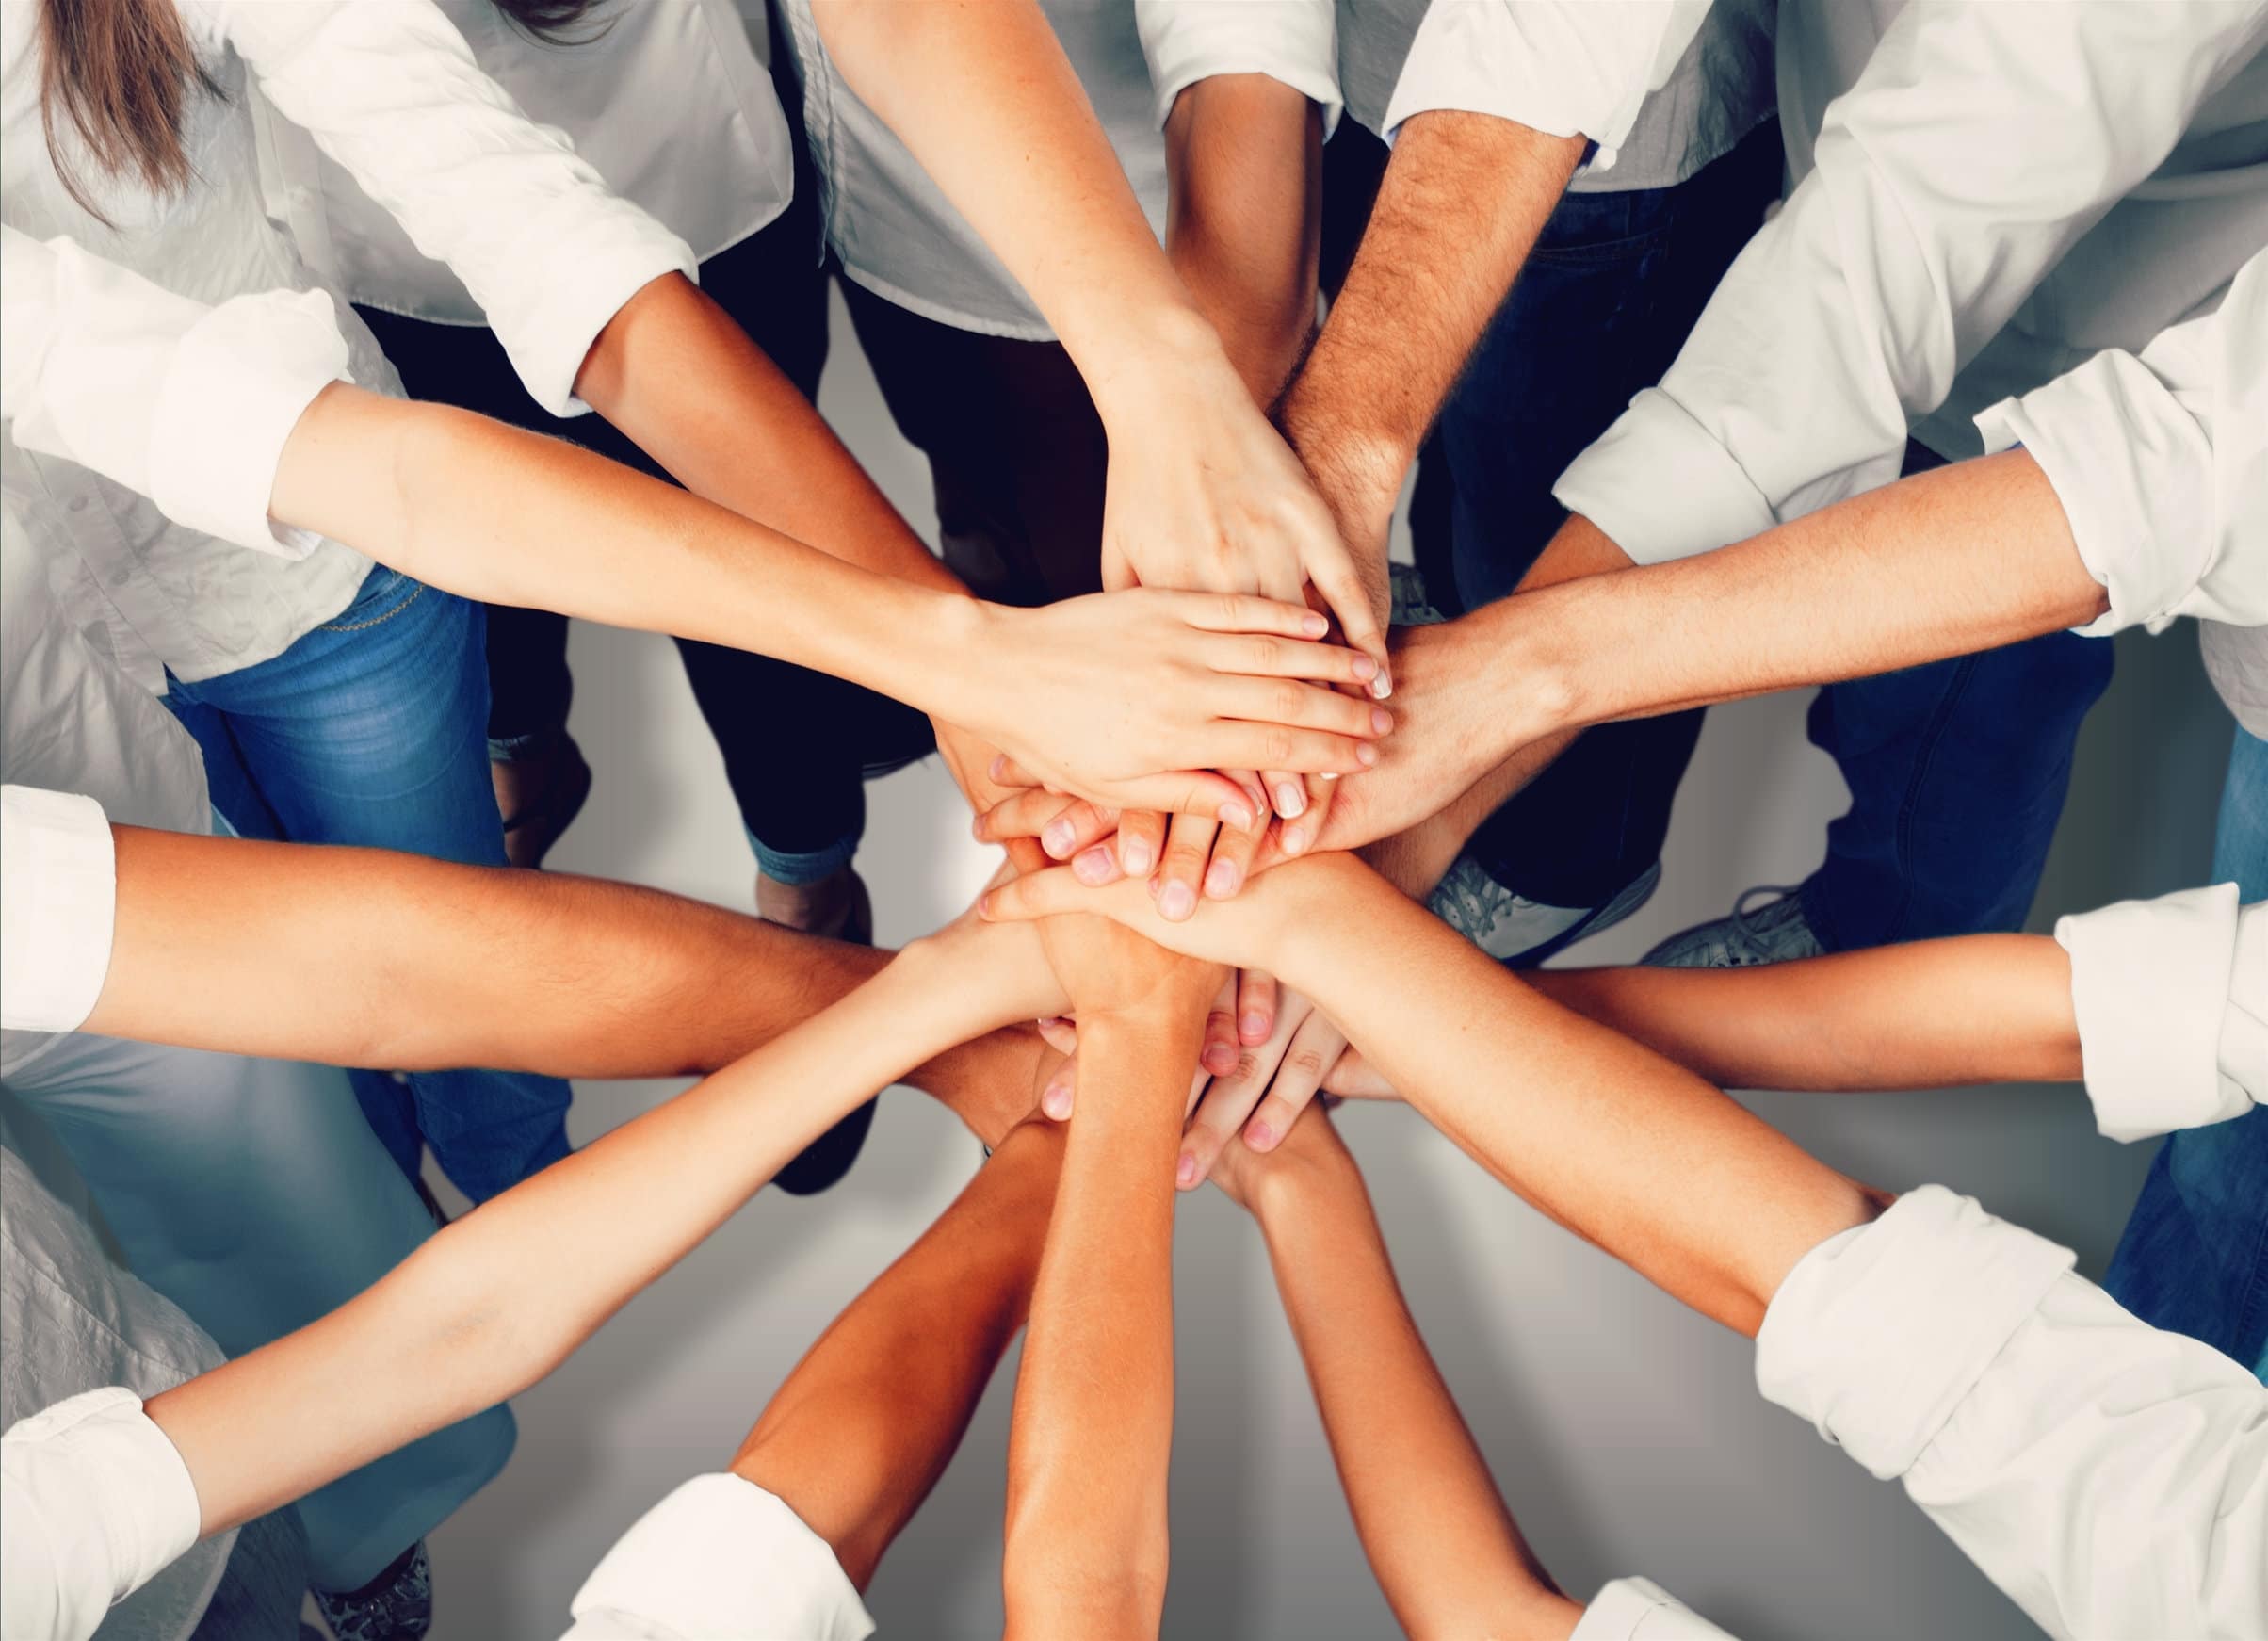 Group of people stacking hands together